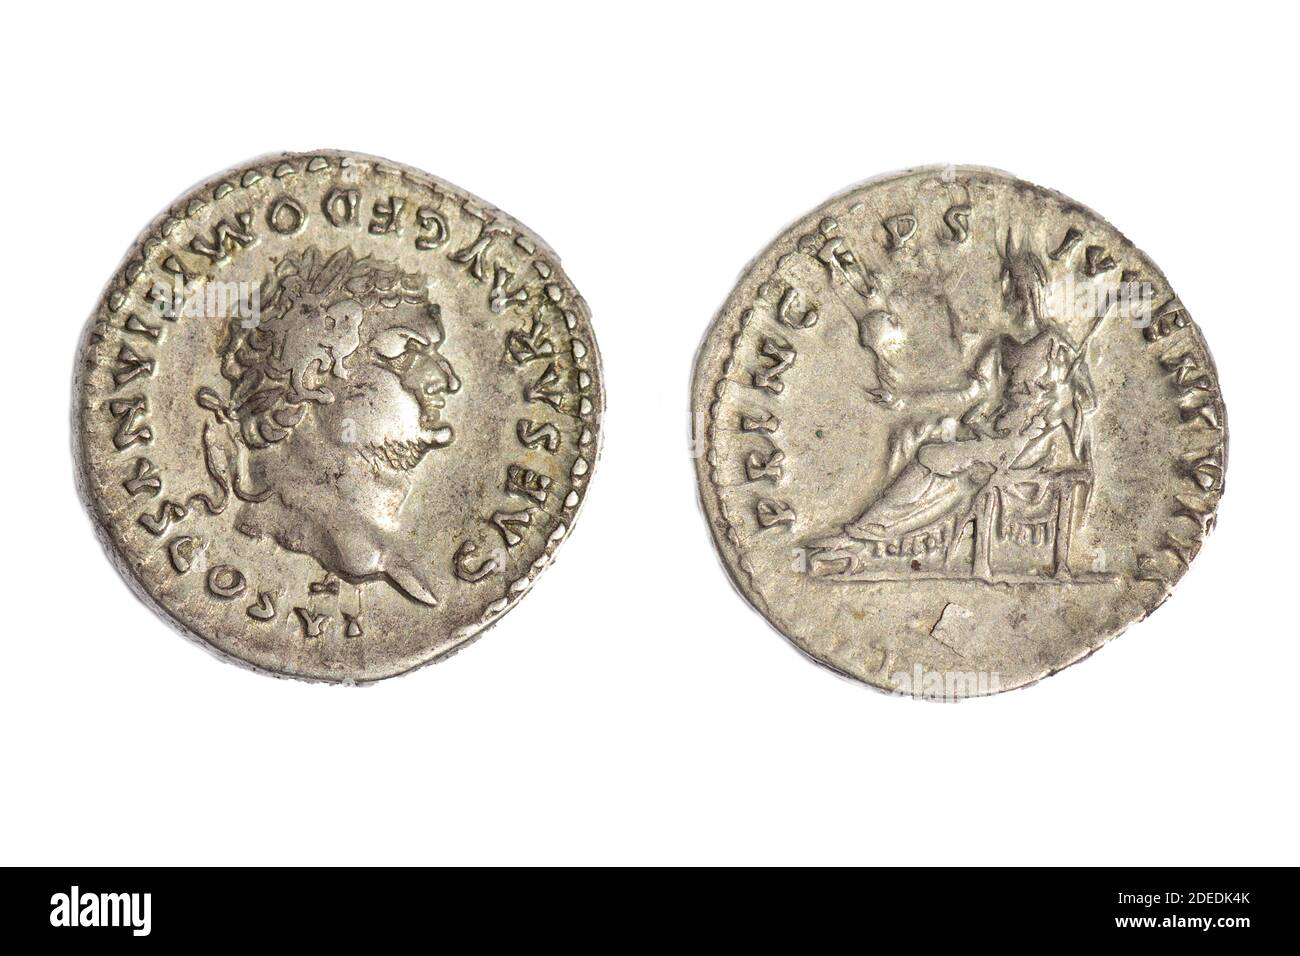 Old Ancient vintage coin coins AR Silver Denarius Emperor Domitian Caesar (reverse side) Goddess of Vesta on a throne. Coin date  79 AD Stock Photo